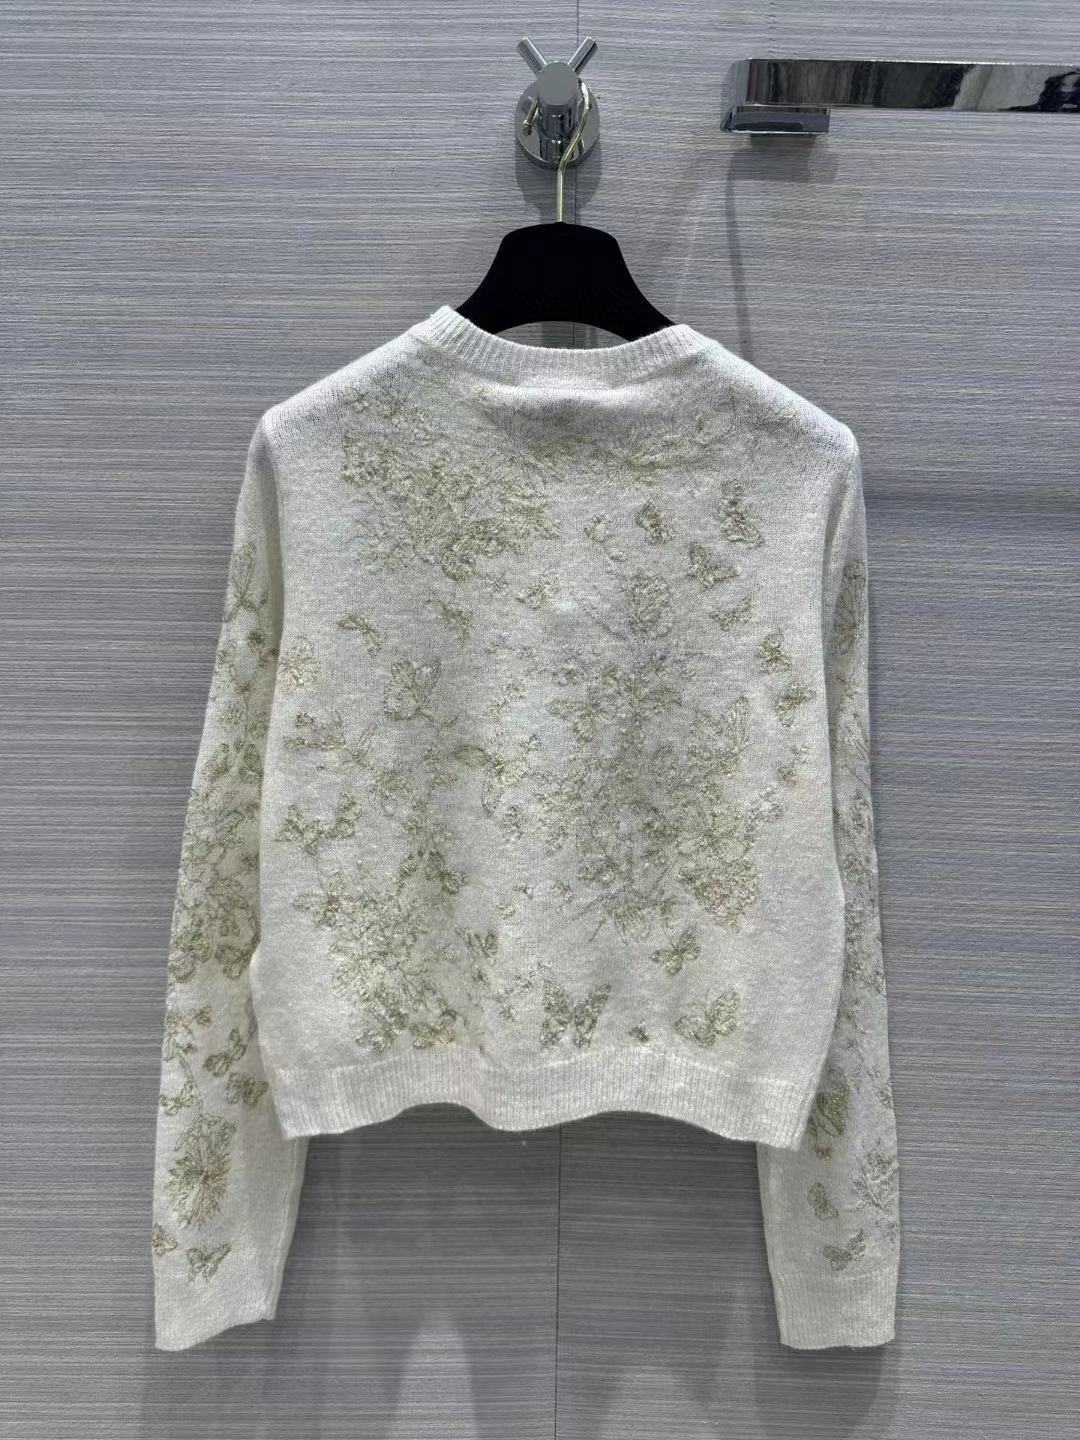 Dior Women CD Embroidered Sweater White Wool Cashmere Knit Gold-Tone Butterflies Motif (11)